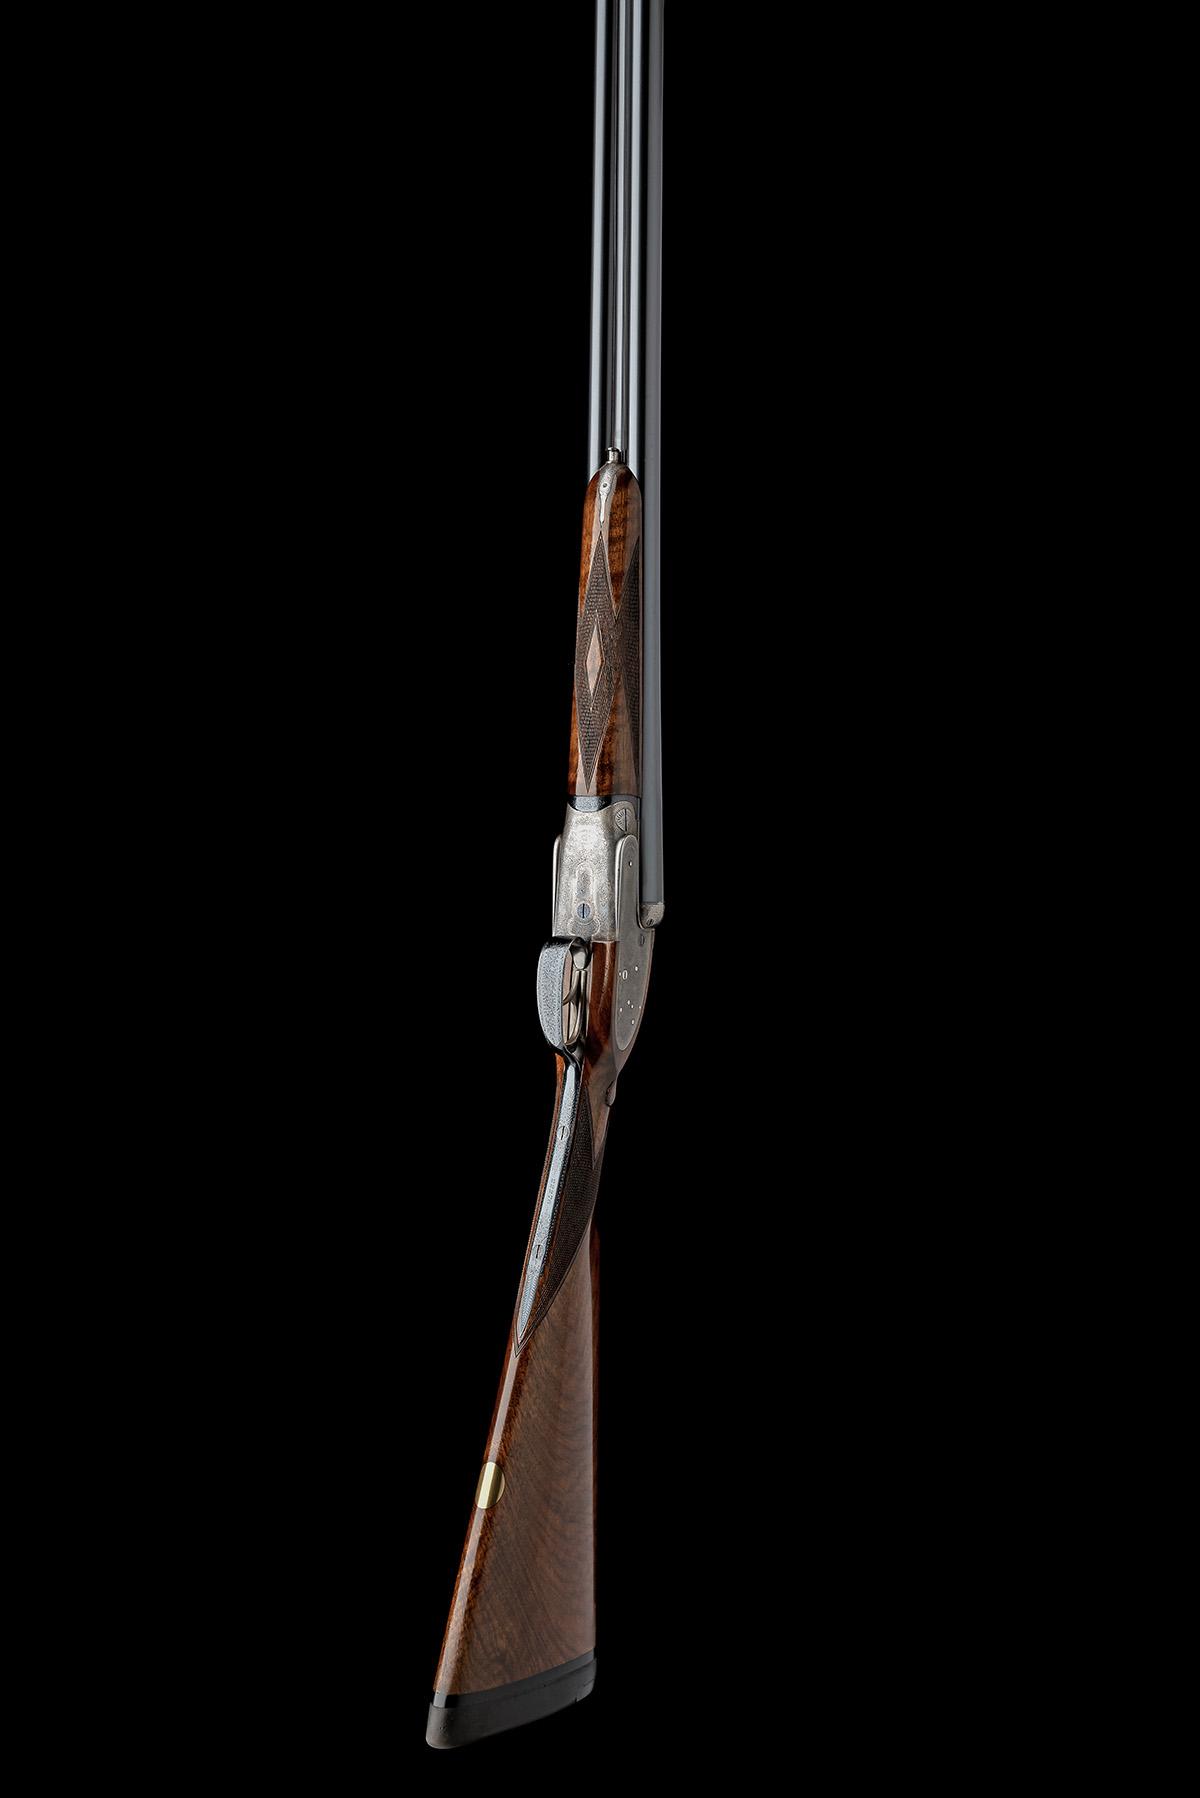 J. PURDEY & SONS A 12-BORE SELF-OPENING SIDELOCK EJECTOR, serial no. 22276, for 1922, 29in. - Image 8 of 9